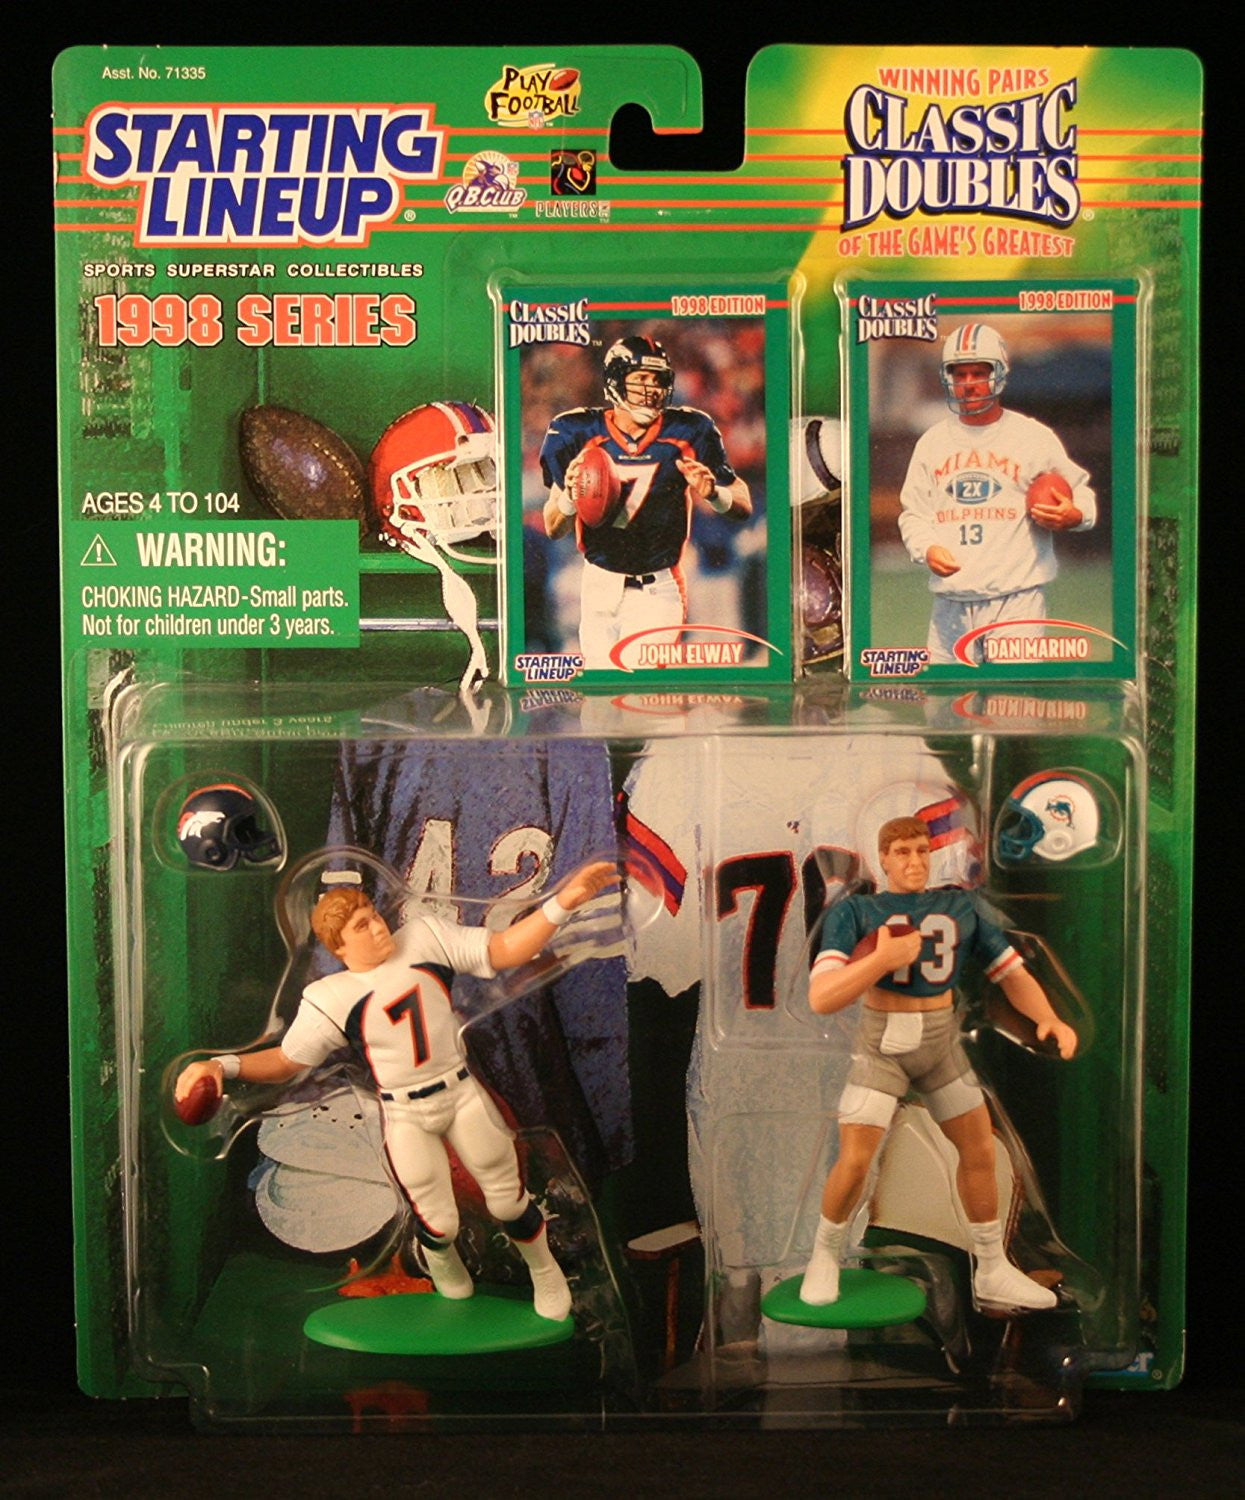 JOHN ELWAY / DENVER BRONCOS & DAN MARINO / MIAMI DOLPHINS 1998 NFL Classic Doubles * Winning Pairs * Starting Lineup Action Figures & Exclusive Collector Trading Cards